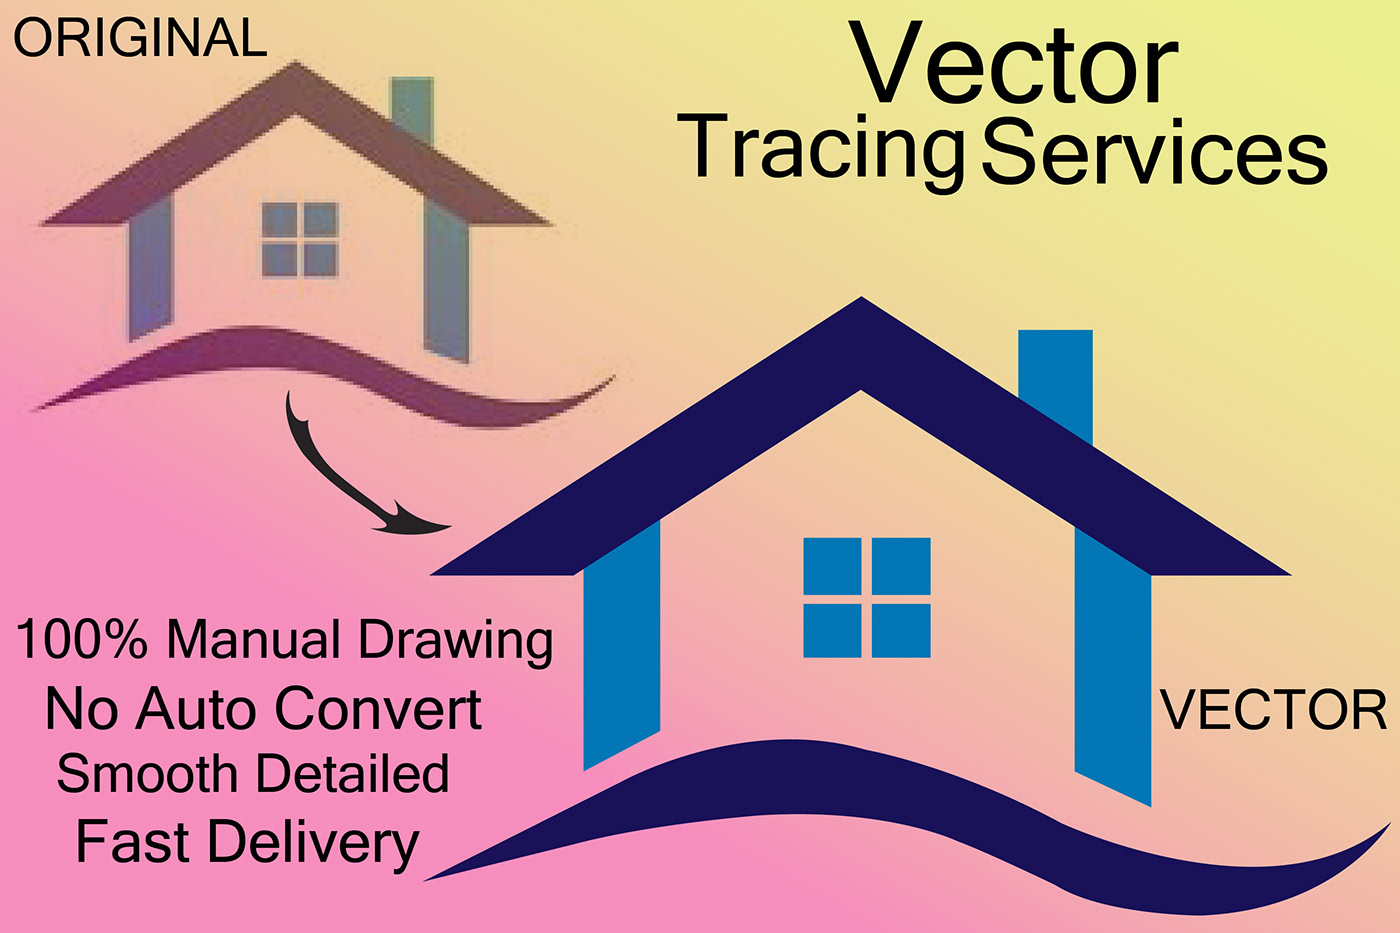 low to high resolution professional vector art raster to vector vecor art vector tracing